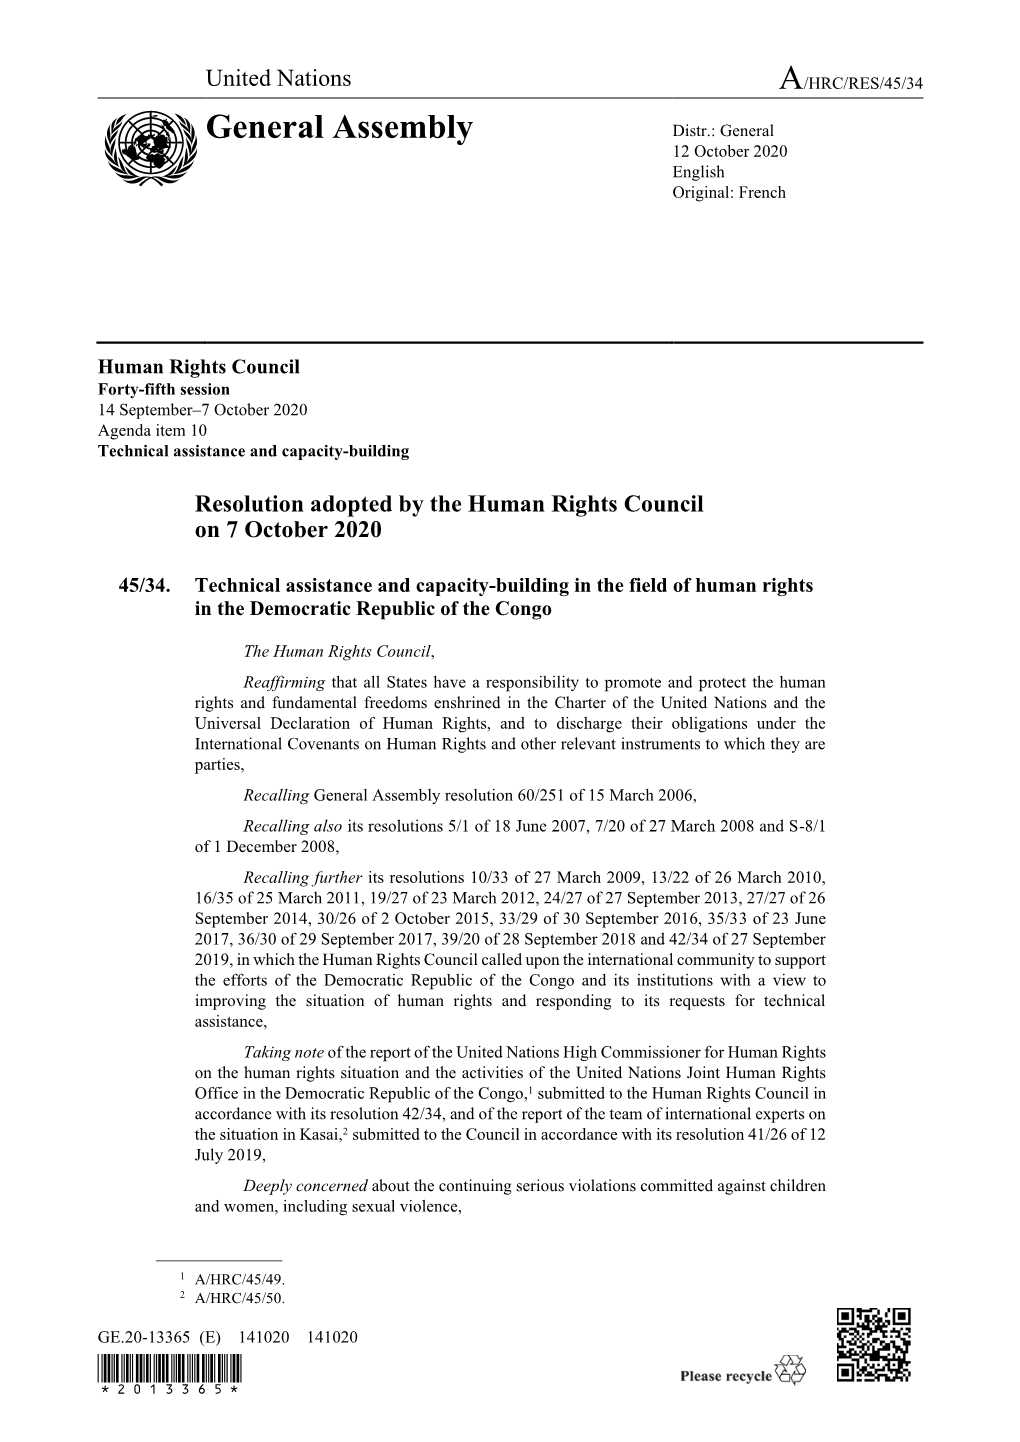 Page 1 GE.20-13365 (E) 141020 141020 Human Rights Council